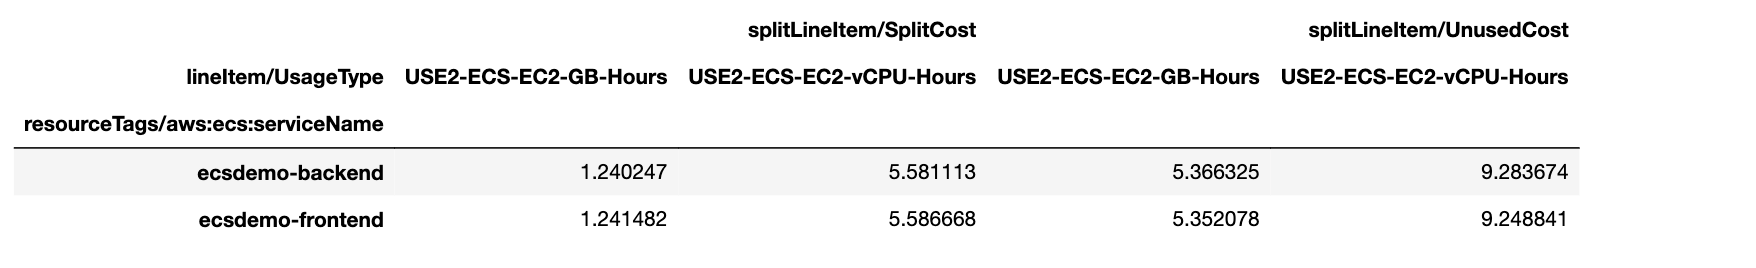 vCPU and Memory used and unused cost by ECS Service